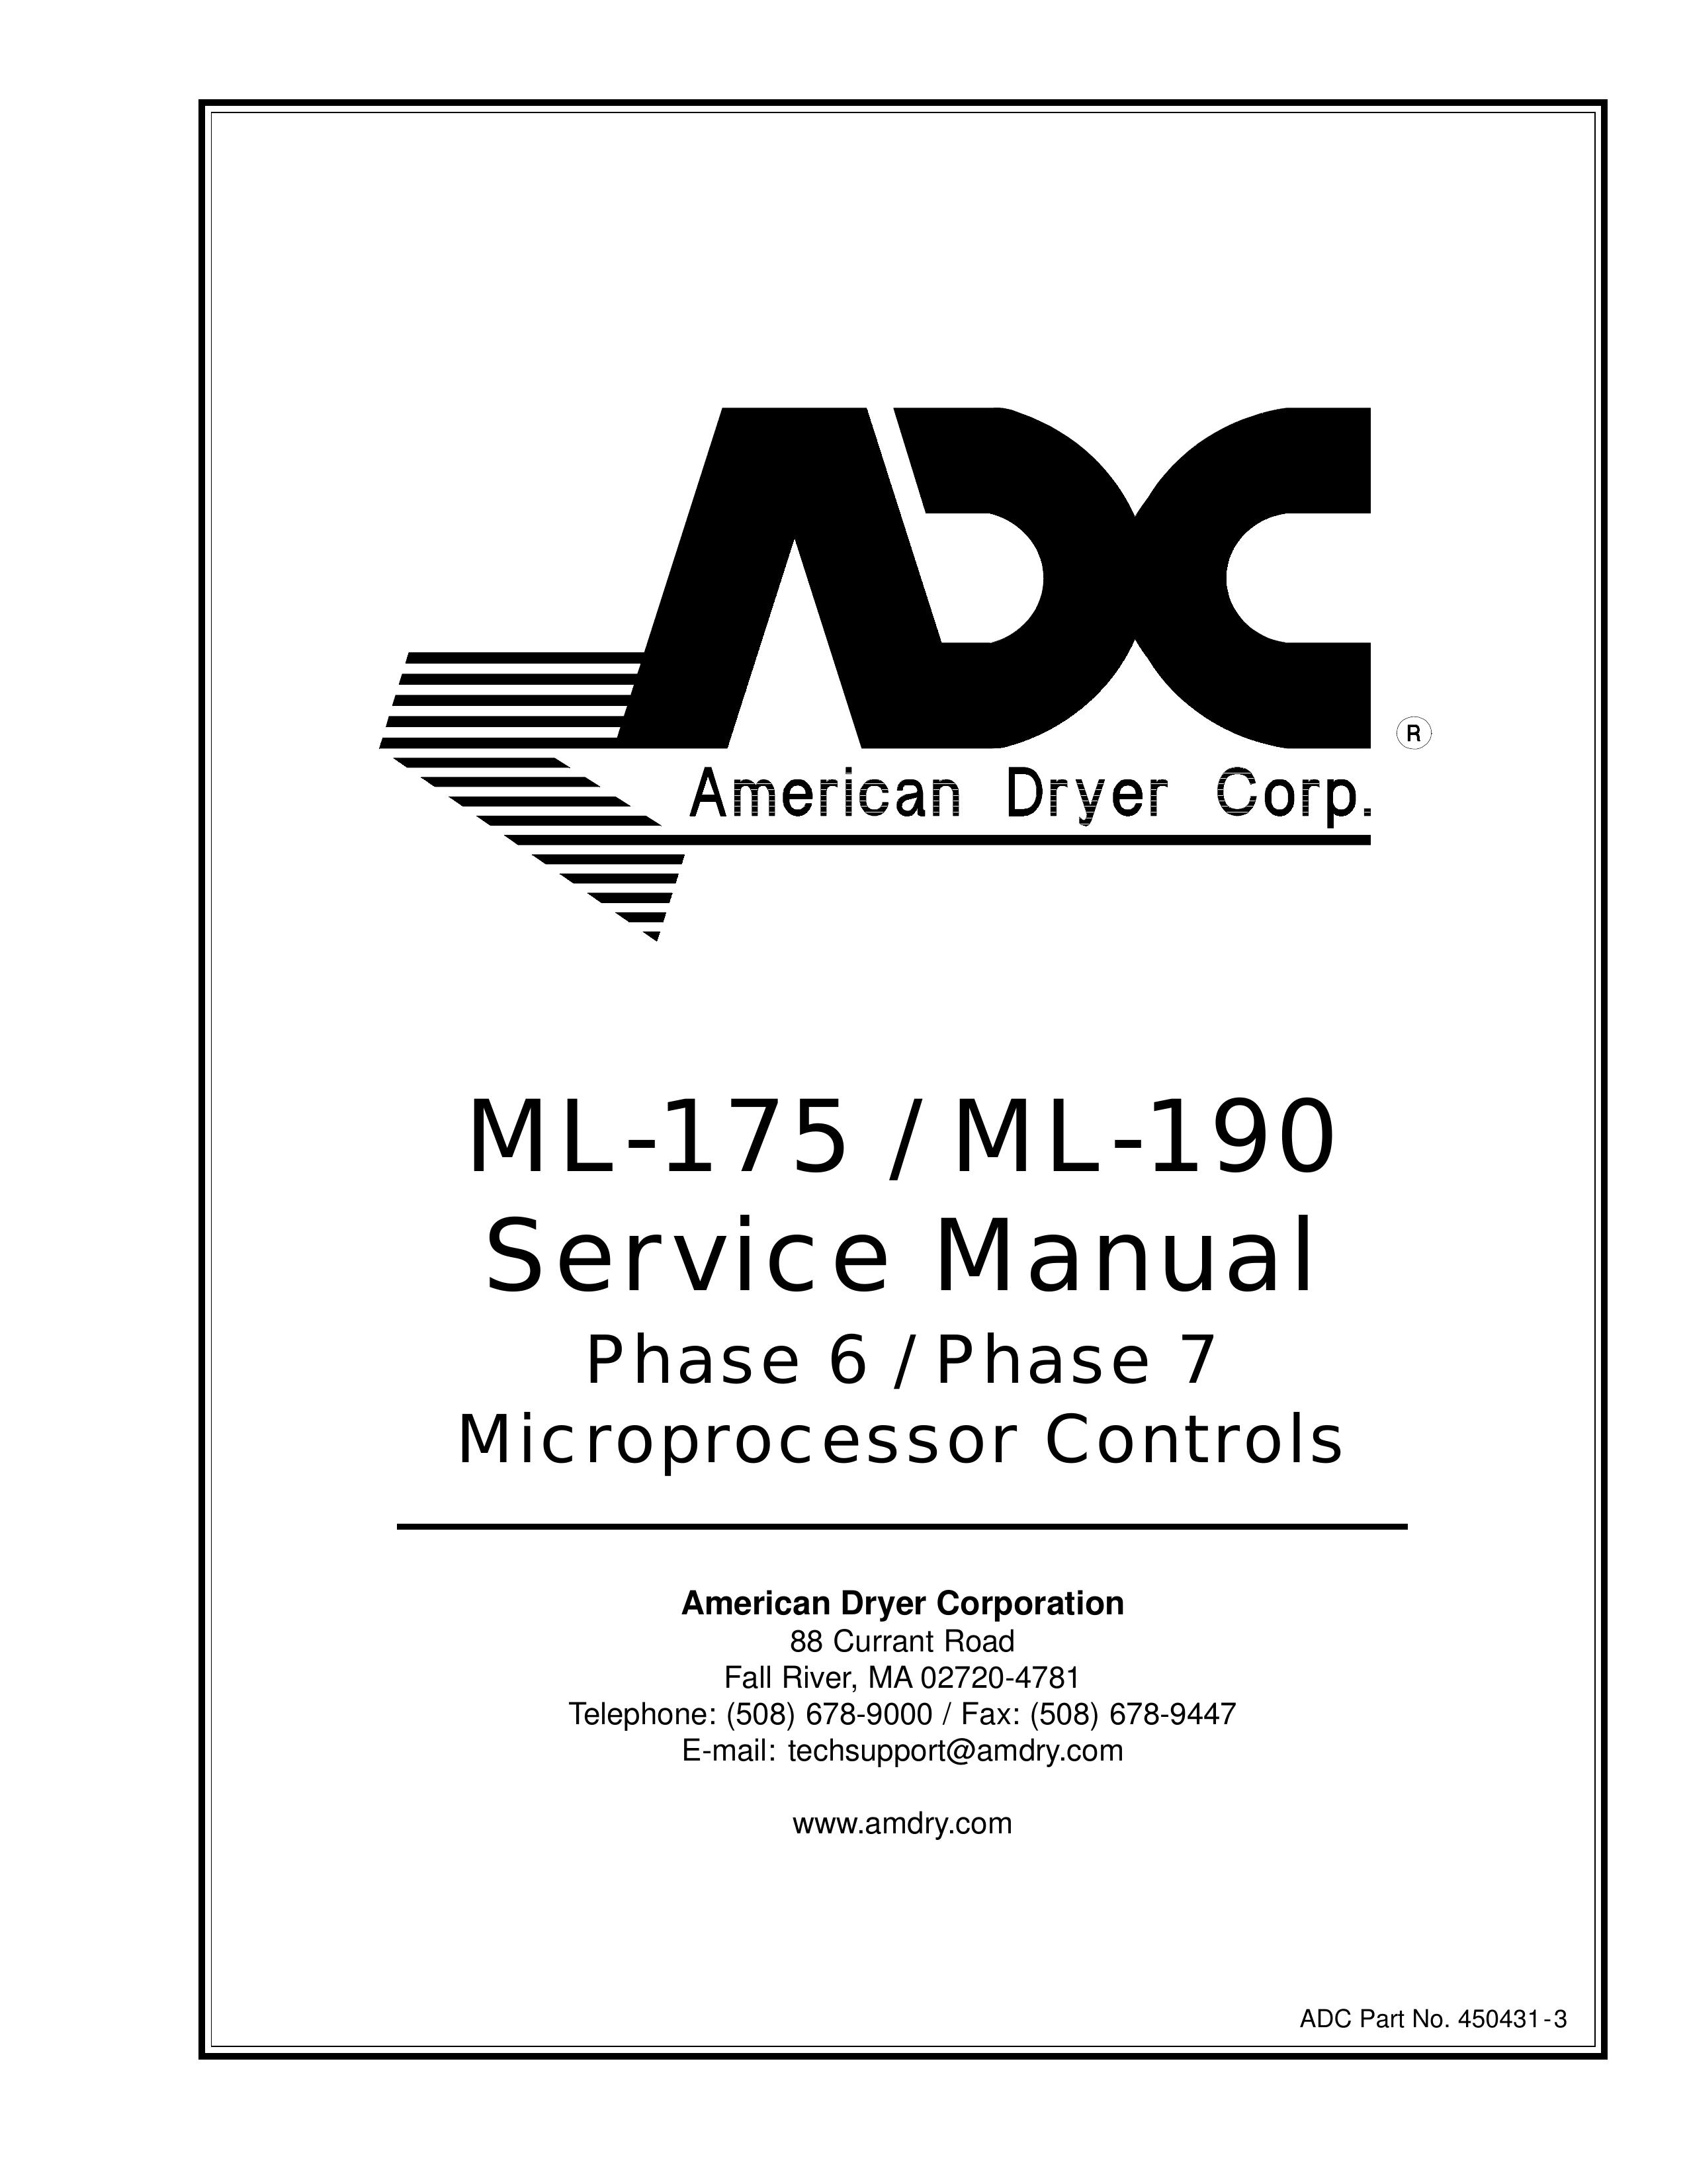 ADC ML-190 Clothes Dryer User Manual (Page 1)